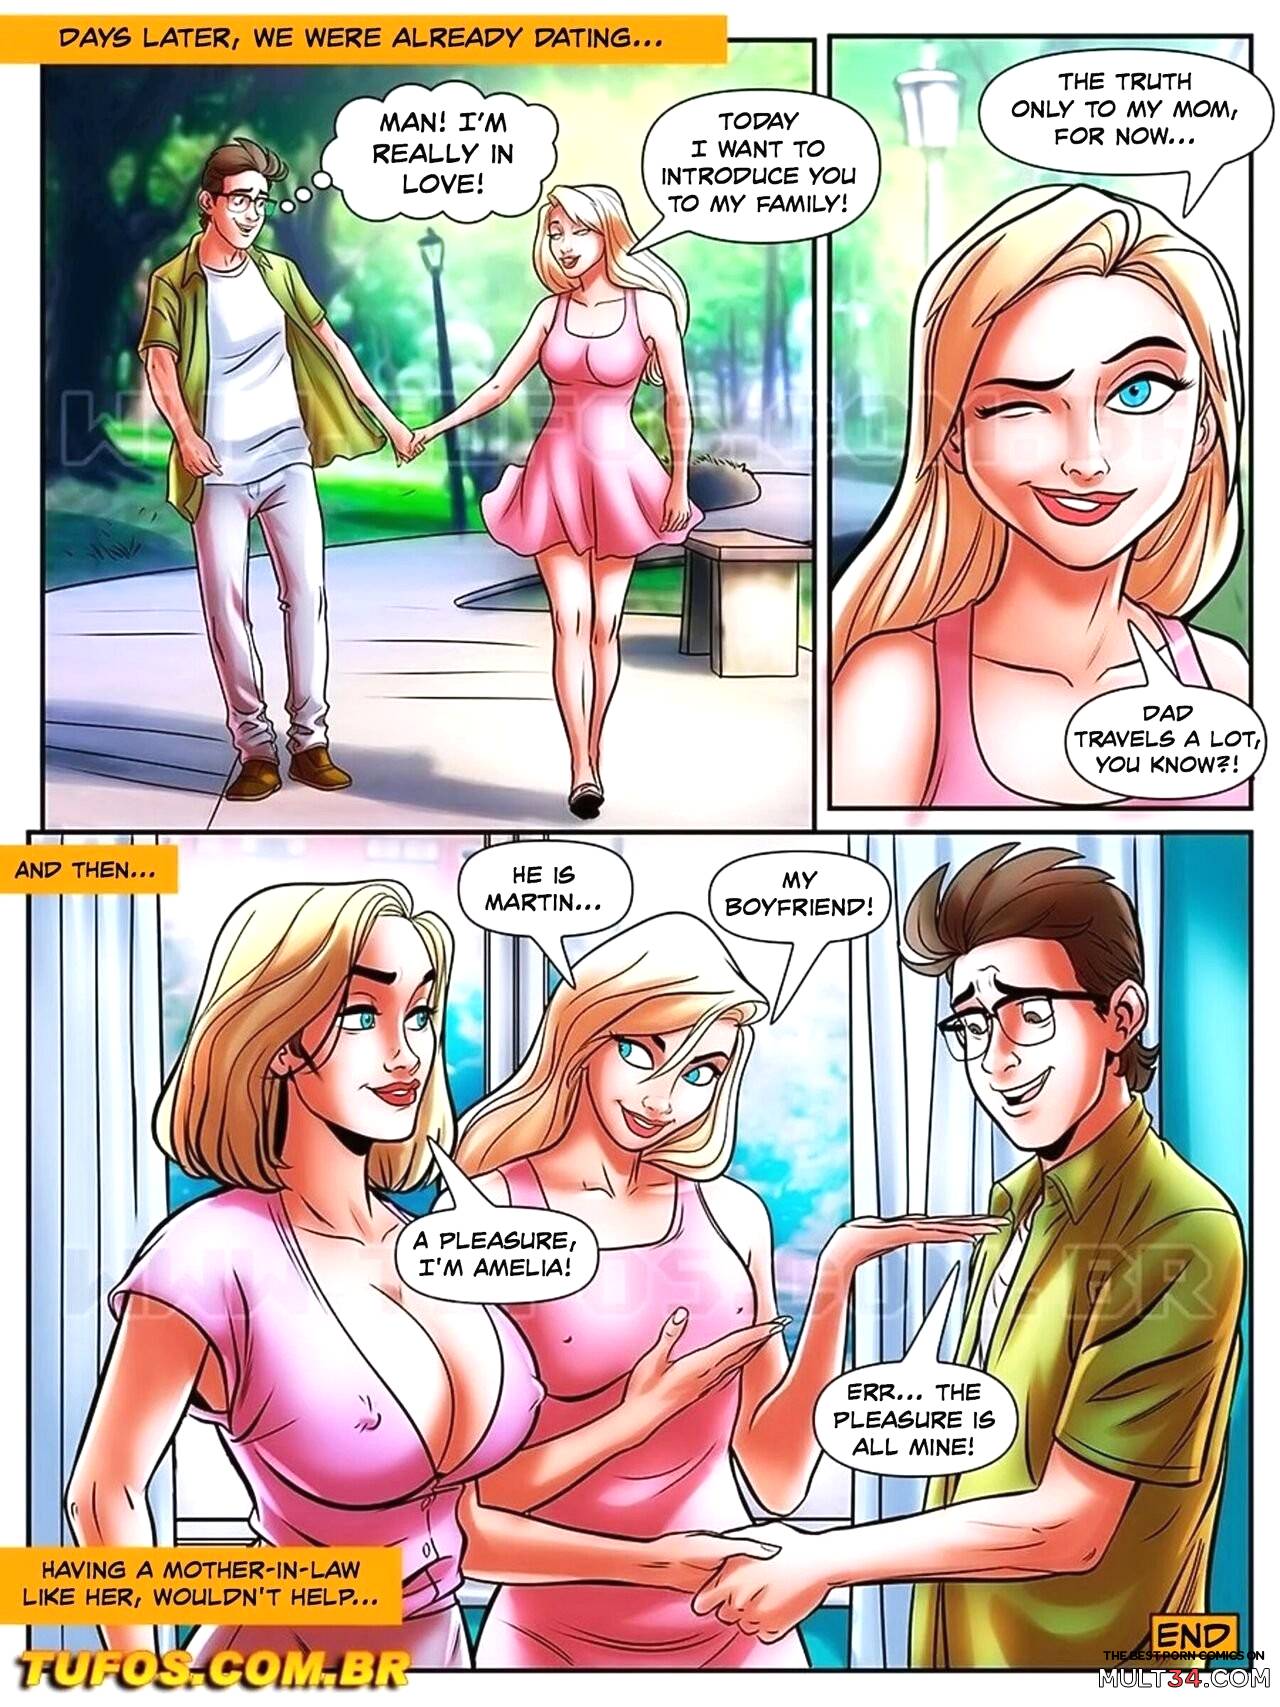 The Nerd Stallion 25 - Hunting women in Tinder page 15